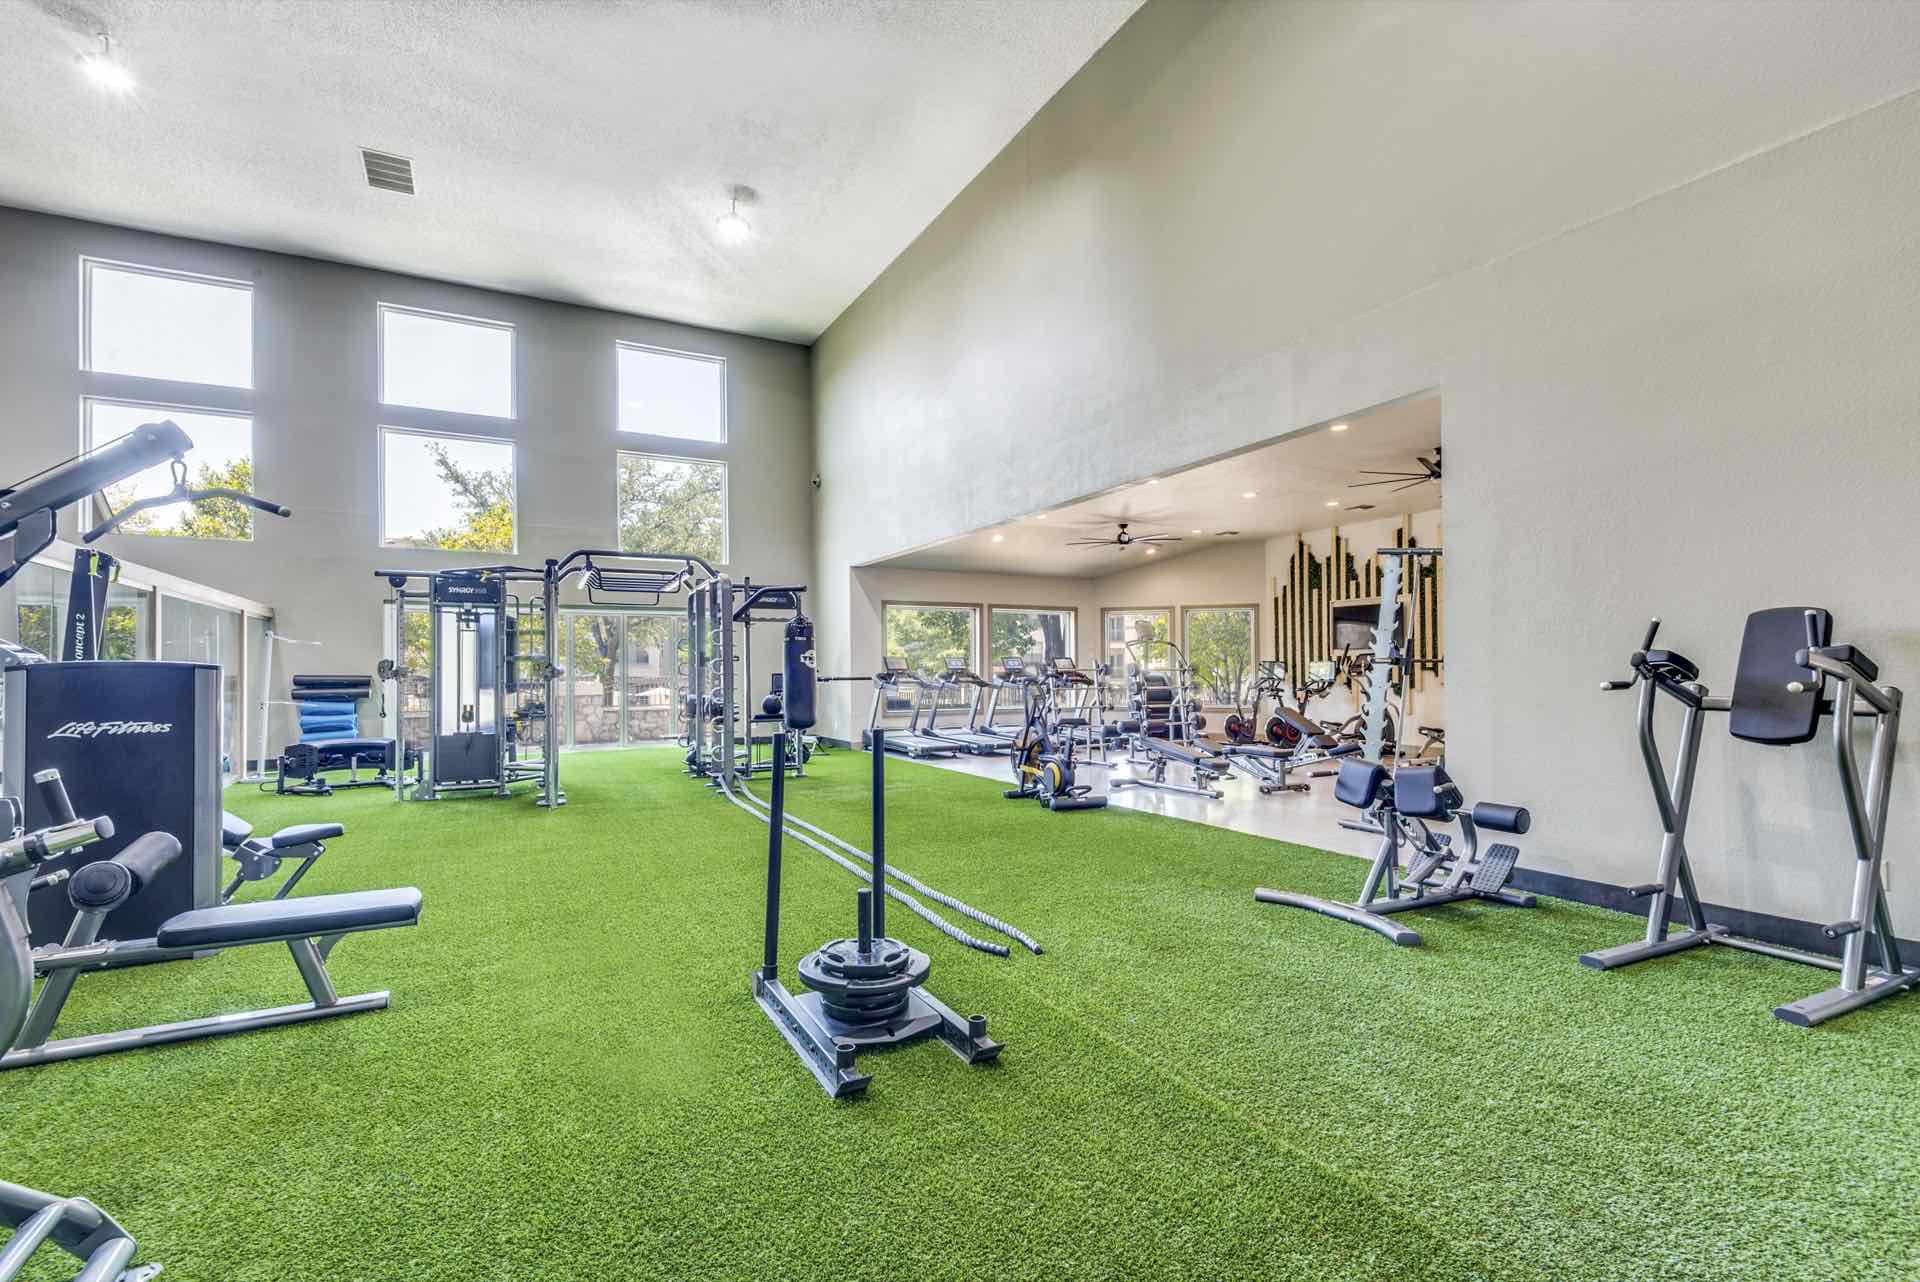 Large fitness room with high ceiling and artificial turf